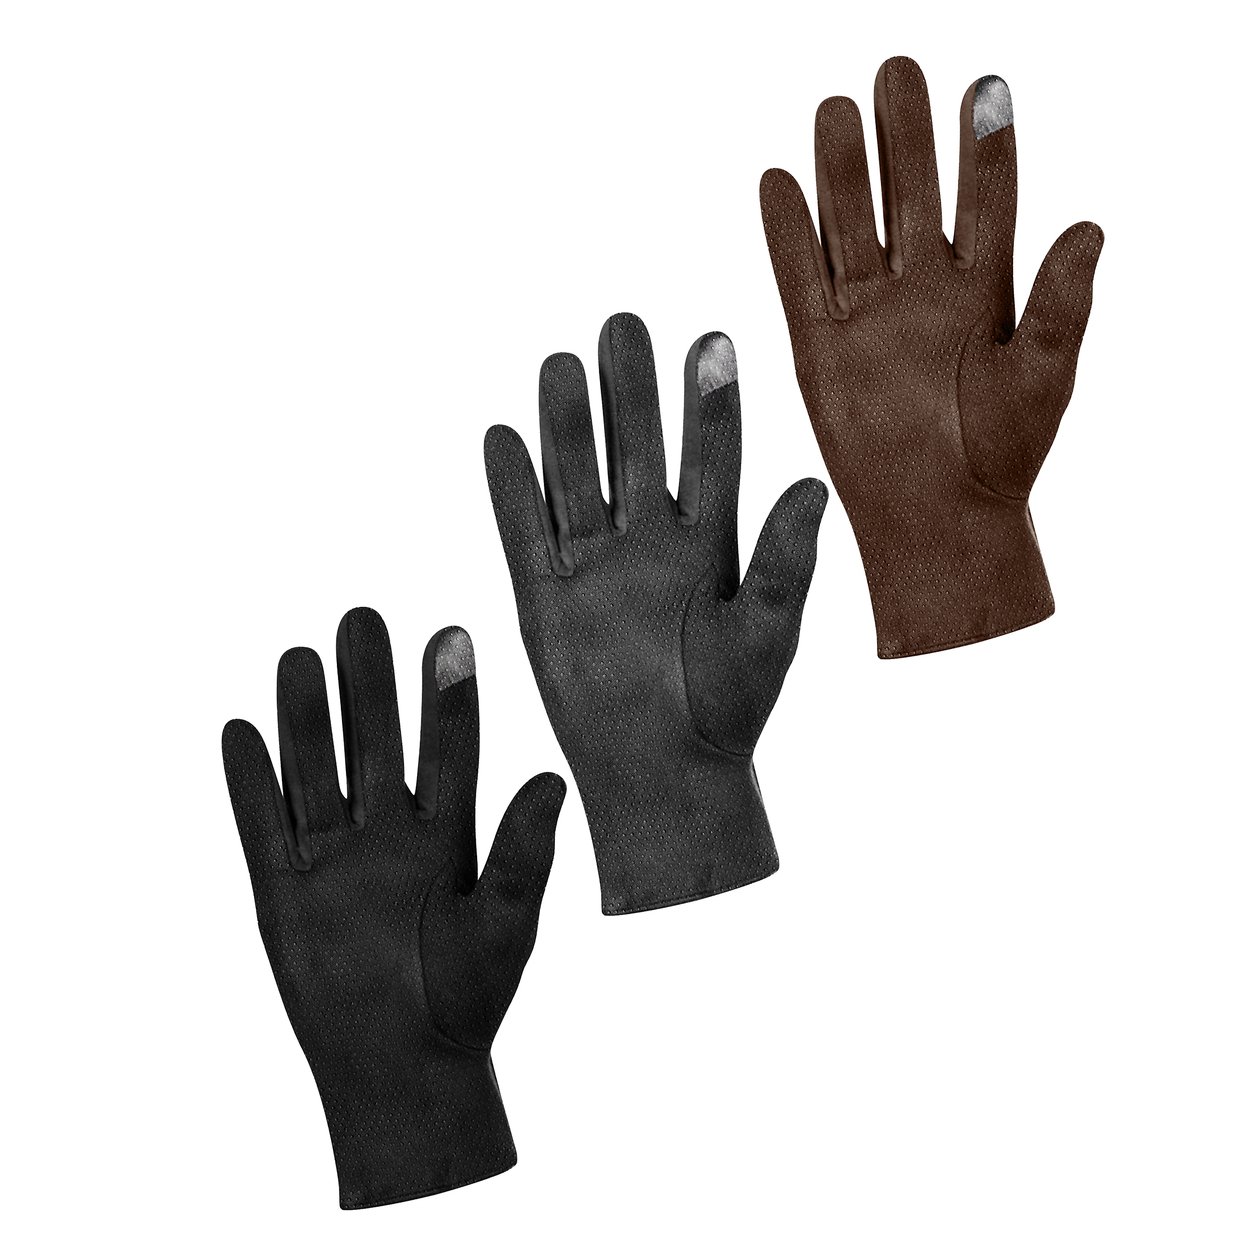 3-Pairs: Winter Warm Soft Lining Weather-Proof Touchscreen Suede Insulated Gloves